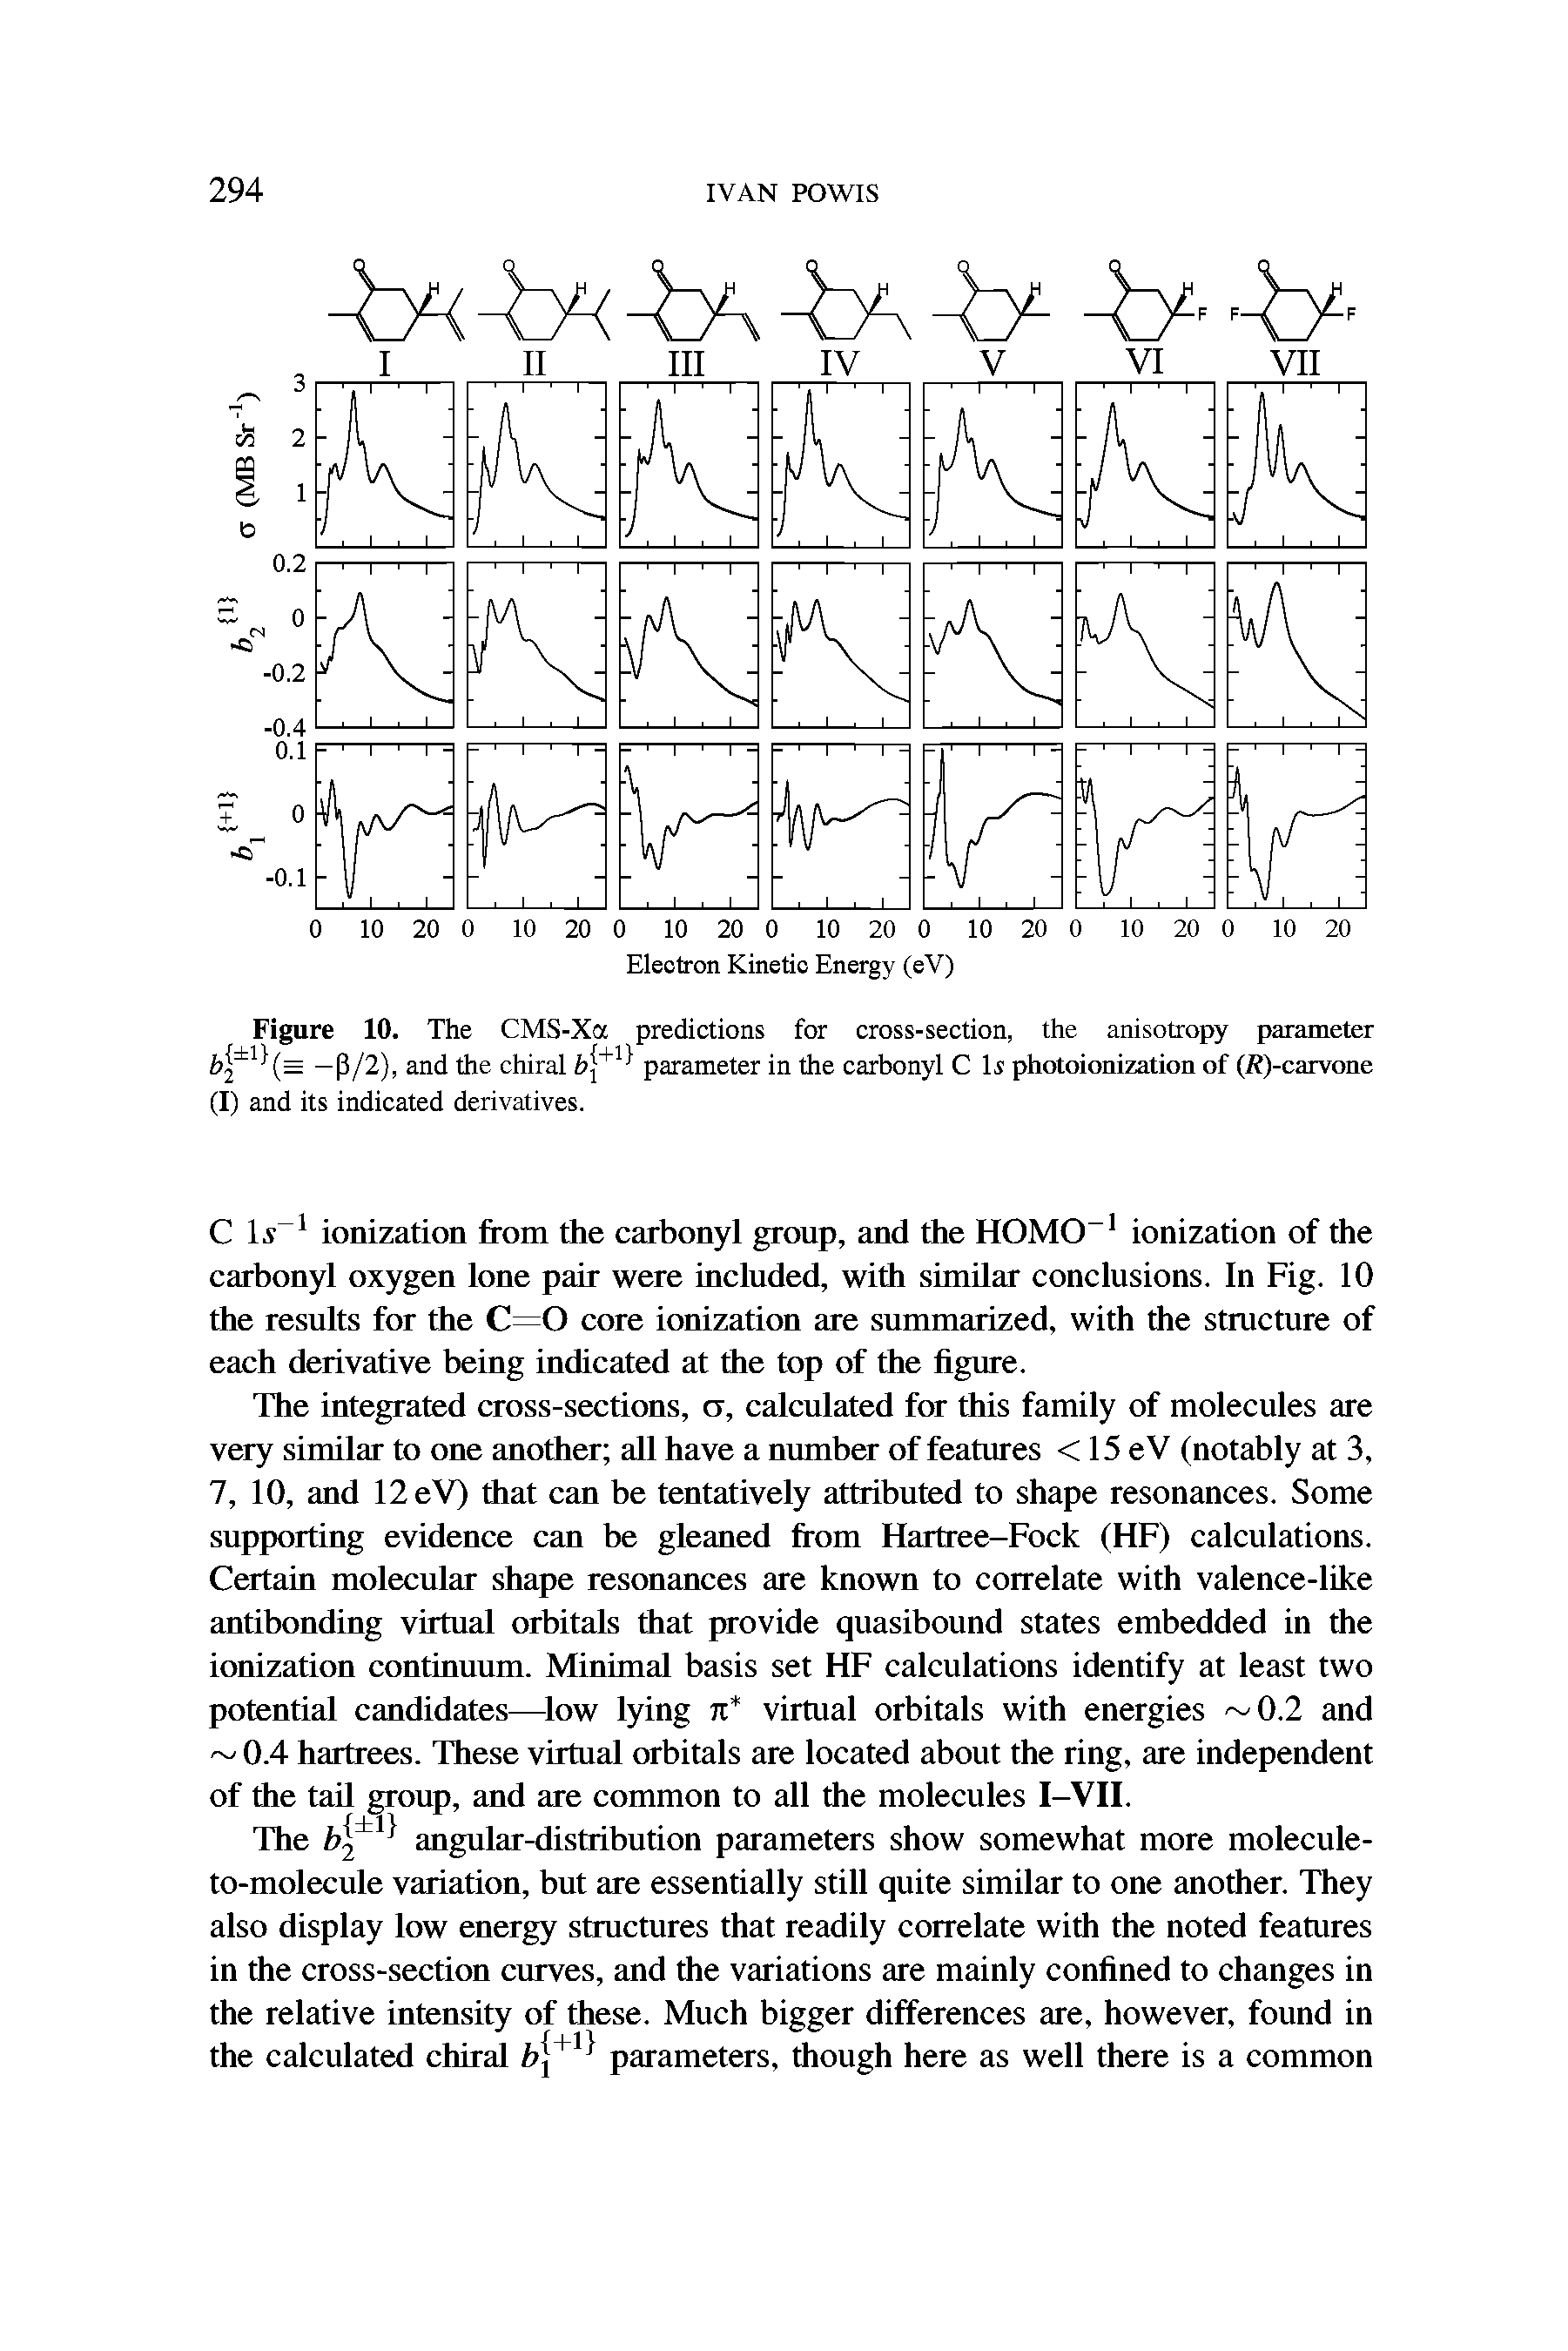 Figure 10. The CMS-Xa predictions for cross-section, the anisotropy parameter —P/2), and the chiral parameter in the carbonyl C li photoionization of (R)-carvone (I) and its indicated derivatives.